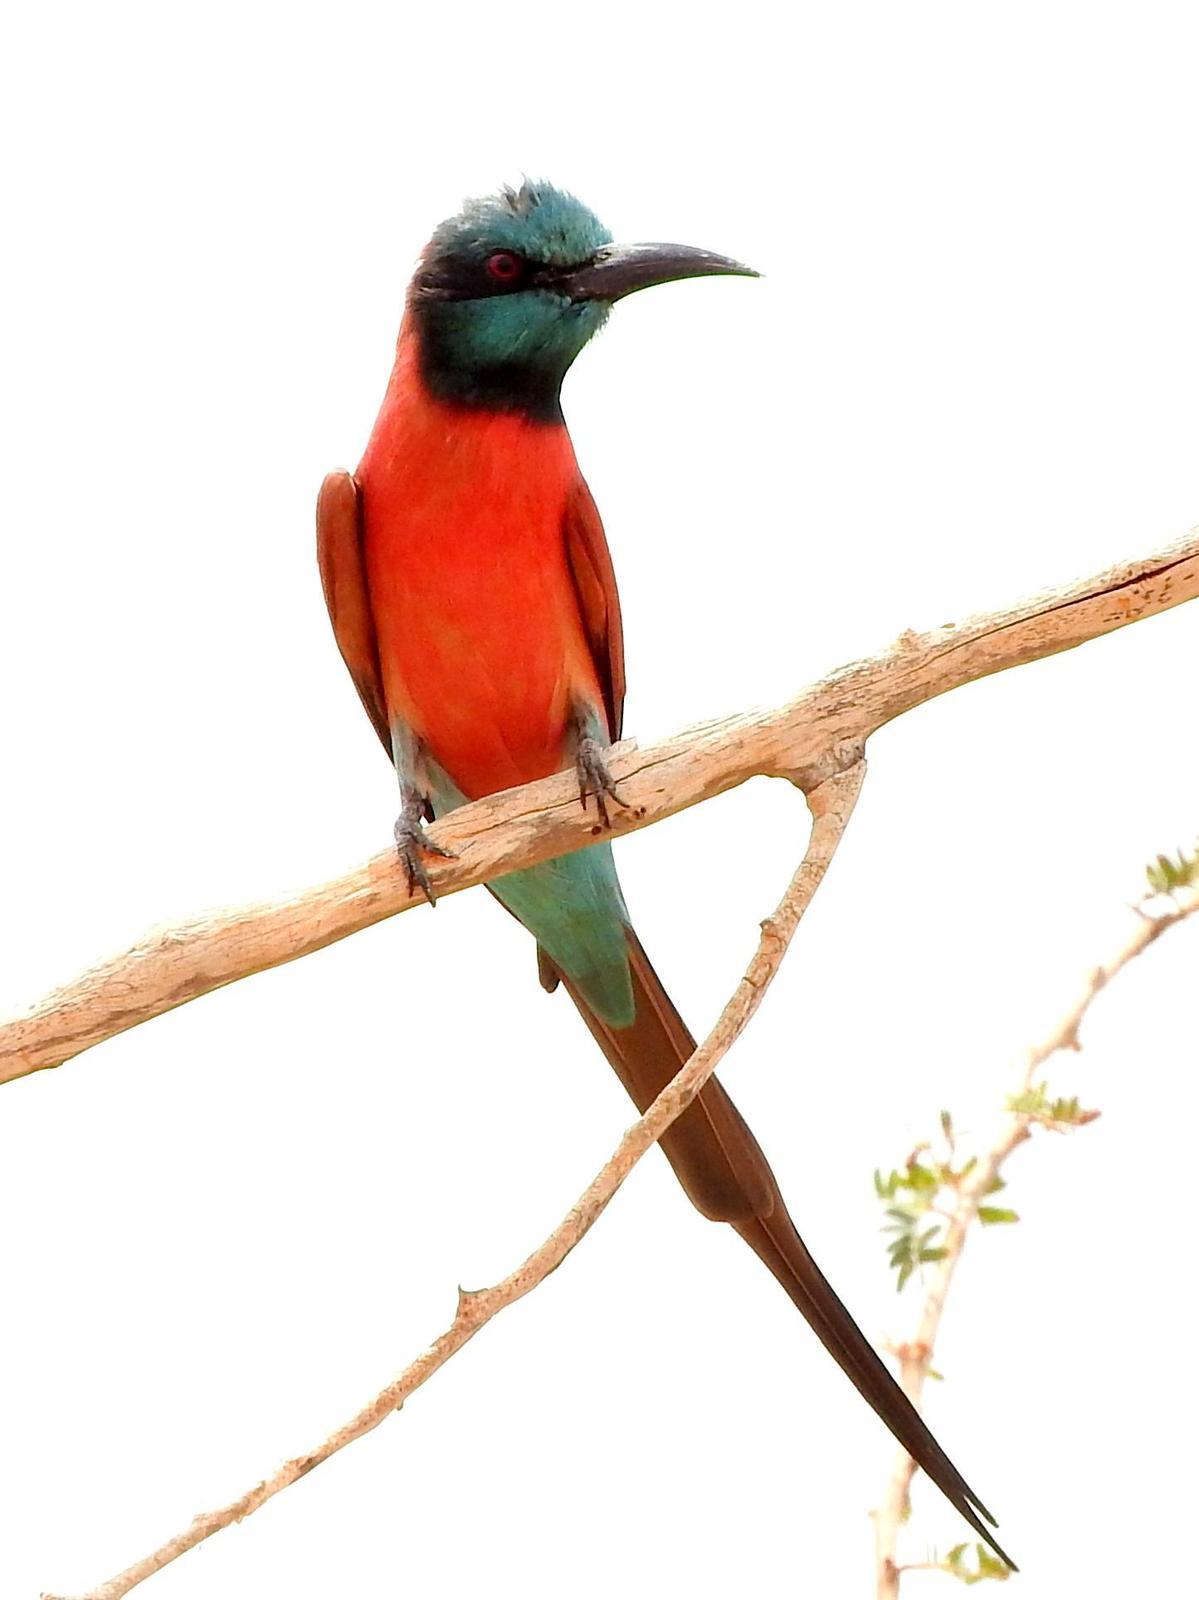 Northern Carmine Bee-eater Photo by Todd A. Watkins